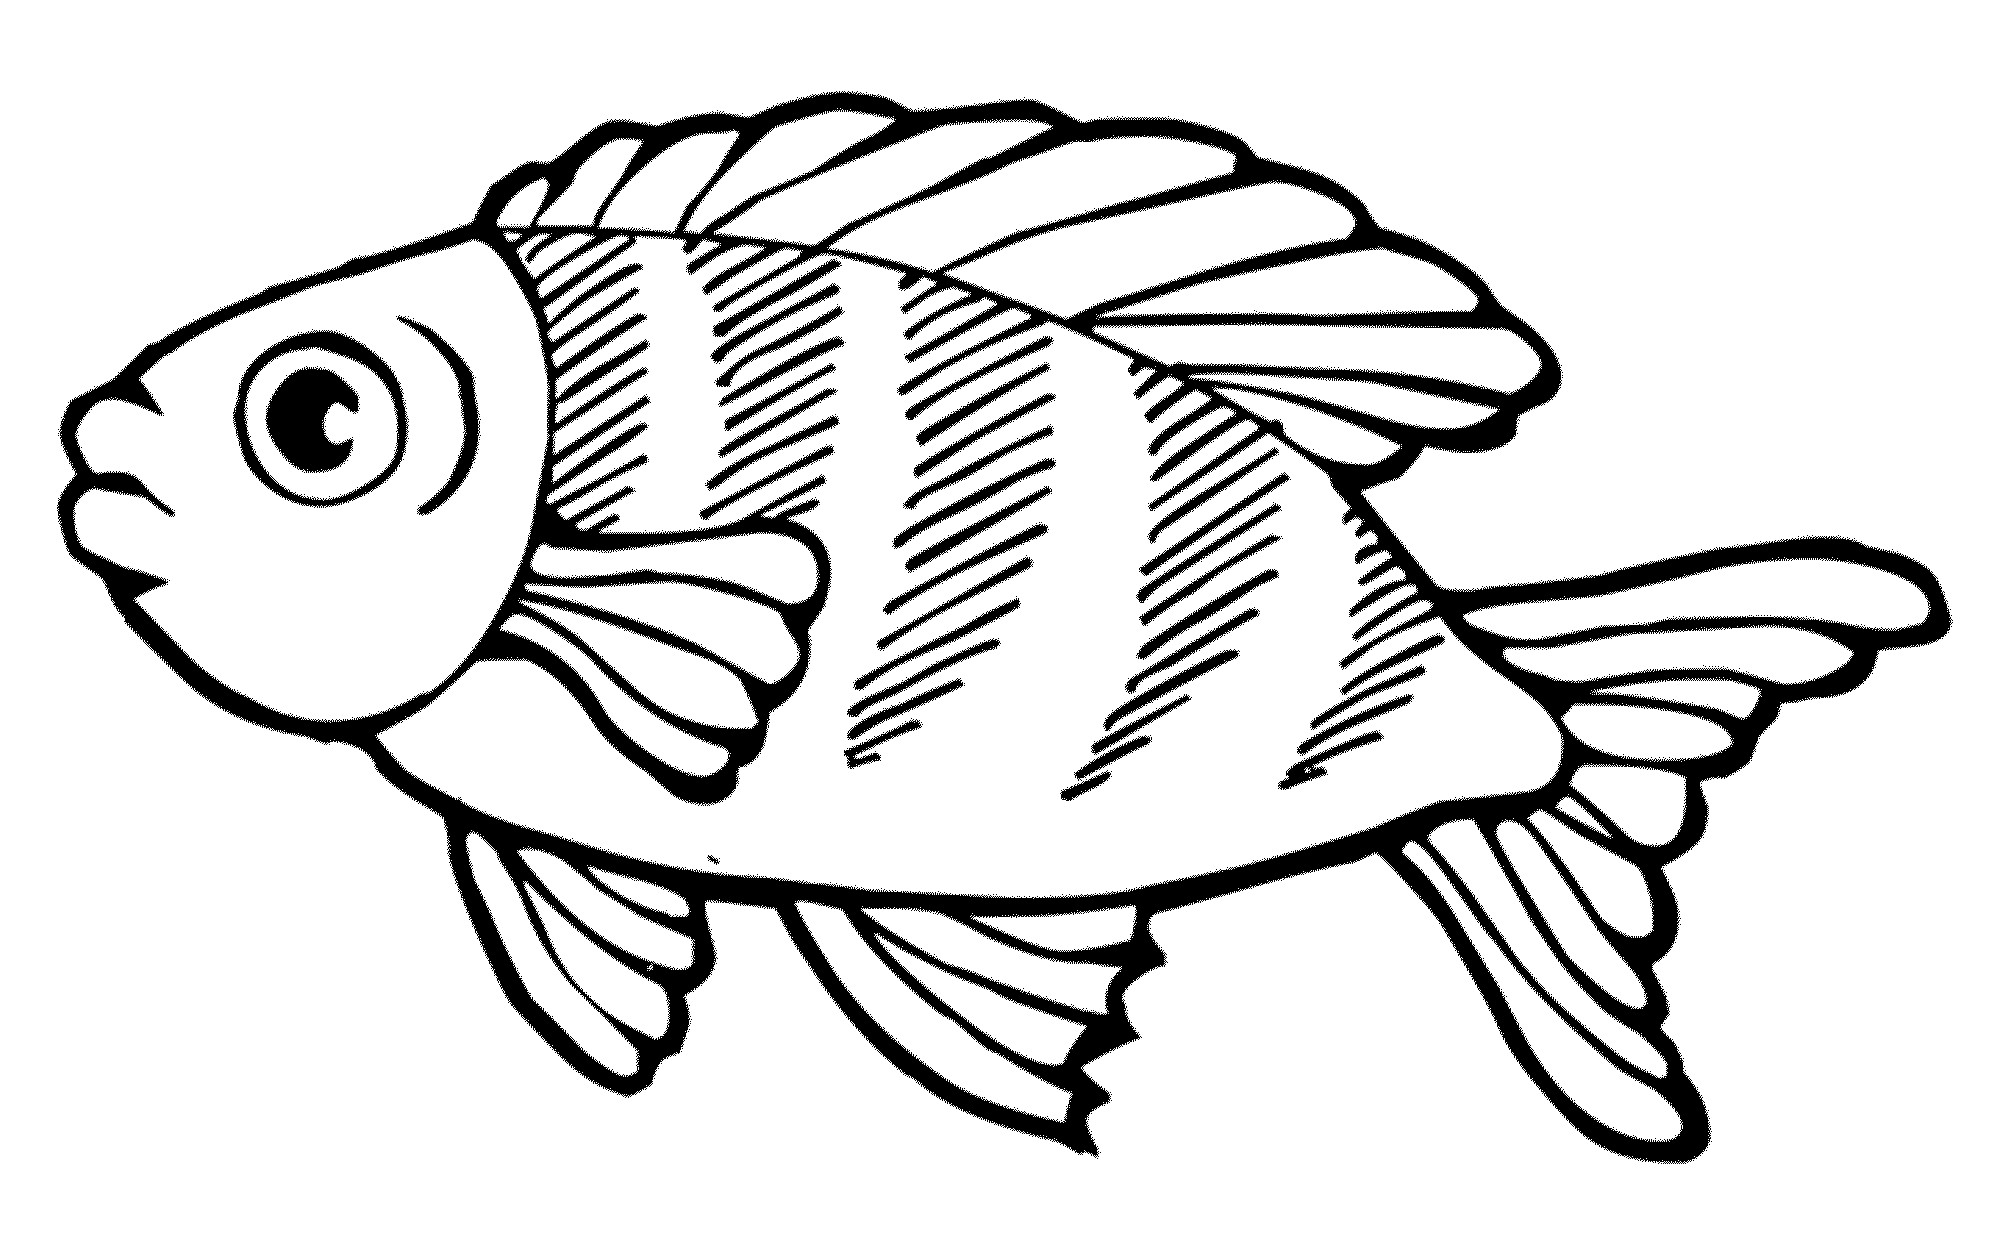 Kids Coloring Pages Fish
 Print & Download Cute and Educative Fish Coloring Pages